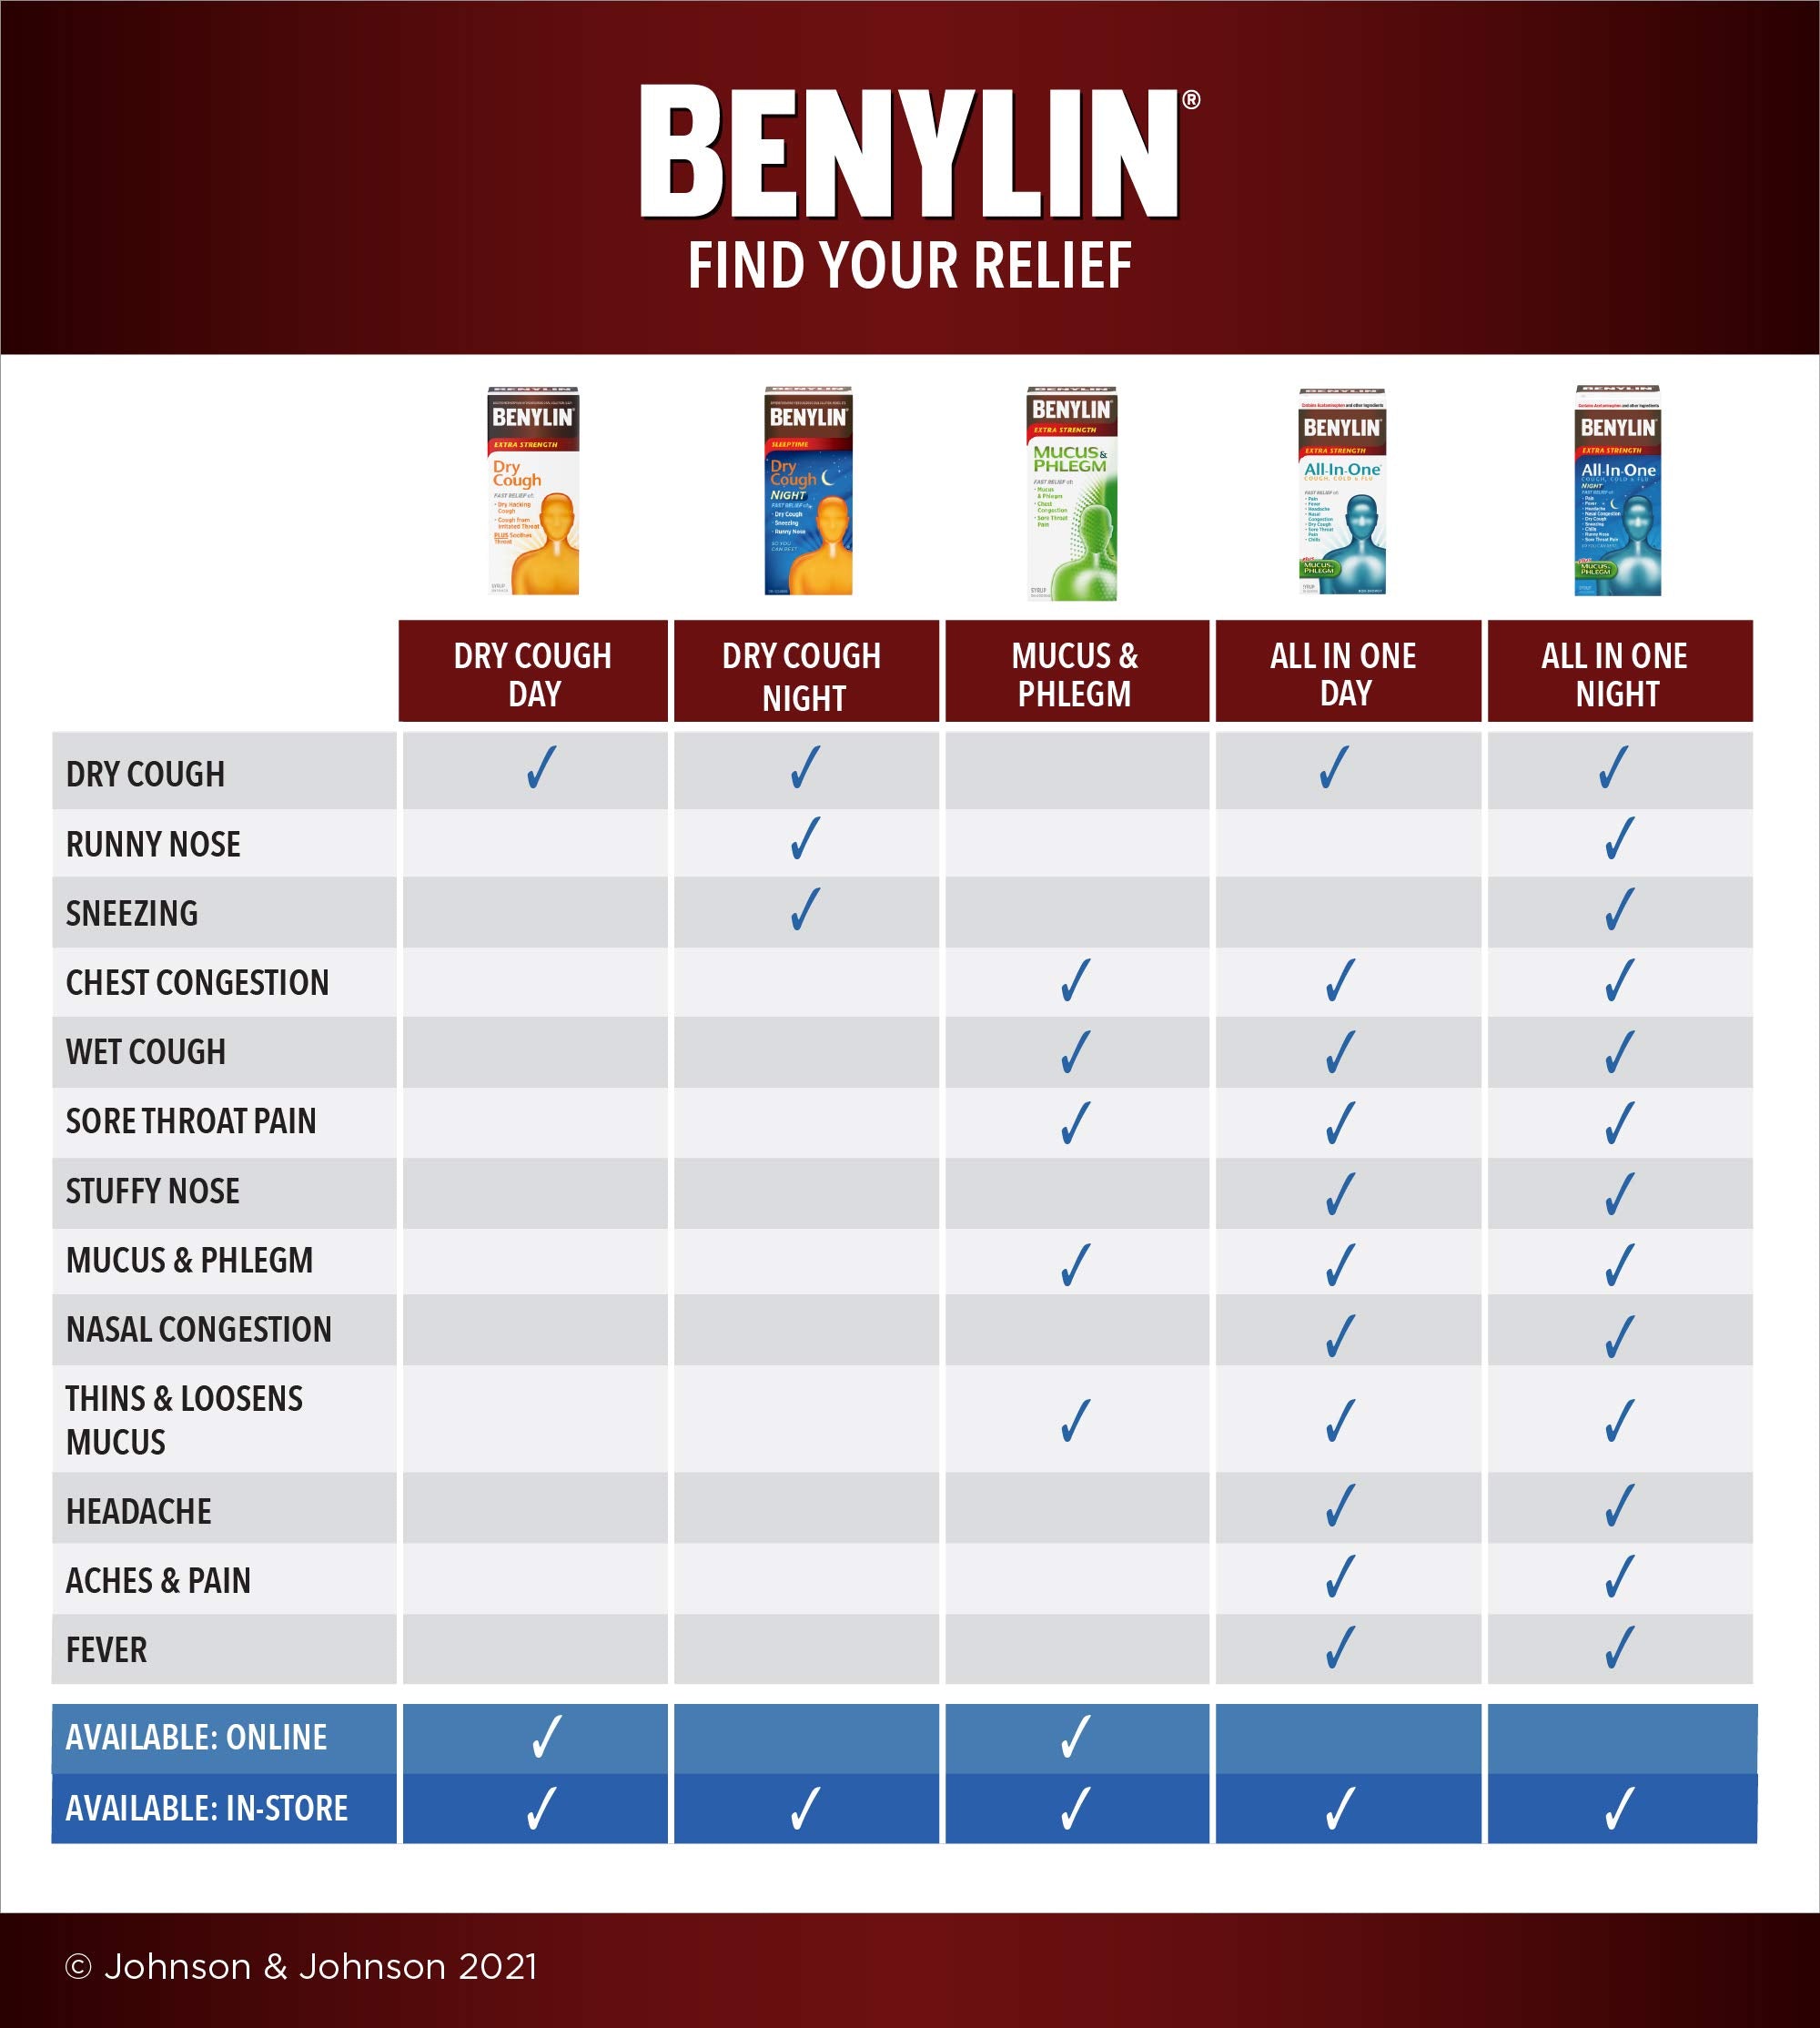 BENYLIN Extra Strength Mucus and Phlegm Syrup, Relieves Chest Congestion and Mucus and Phlegm 250mL